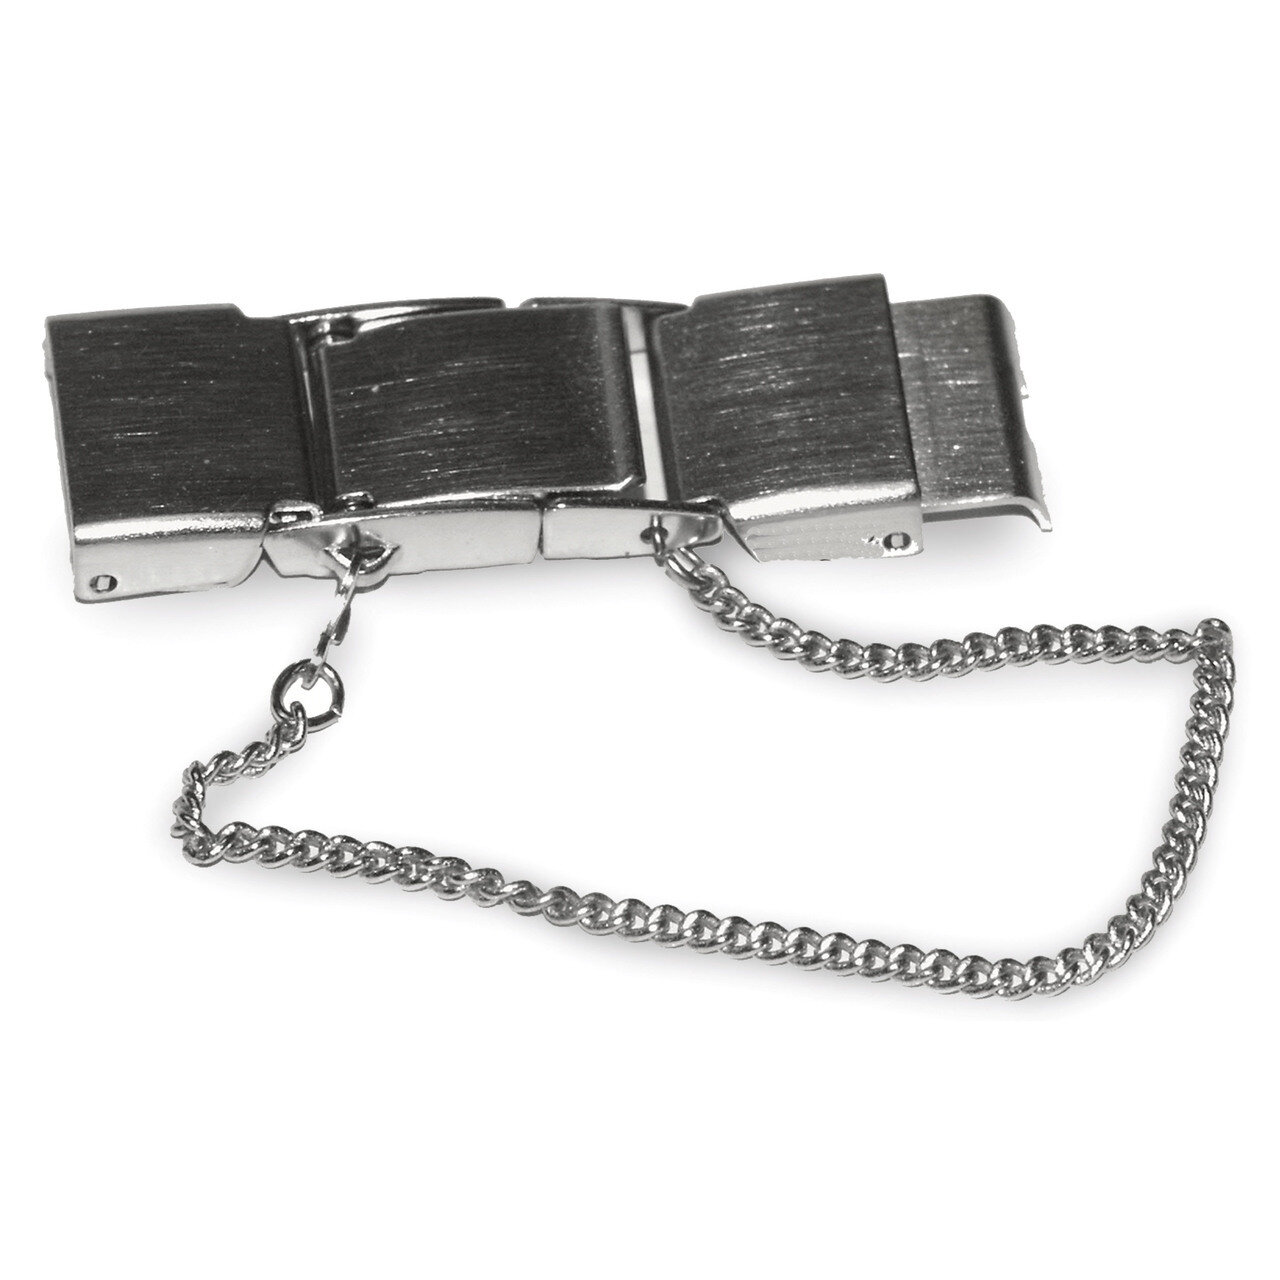 8mm Seiko-Style with Safety Chain Stainless Steel Clasp 8 Inch FTL135W-8